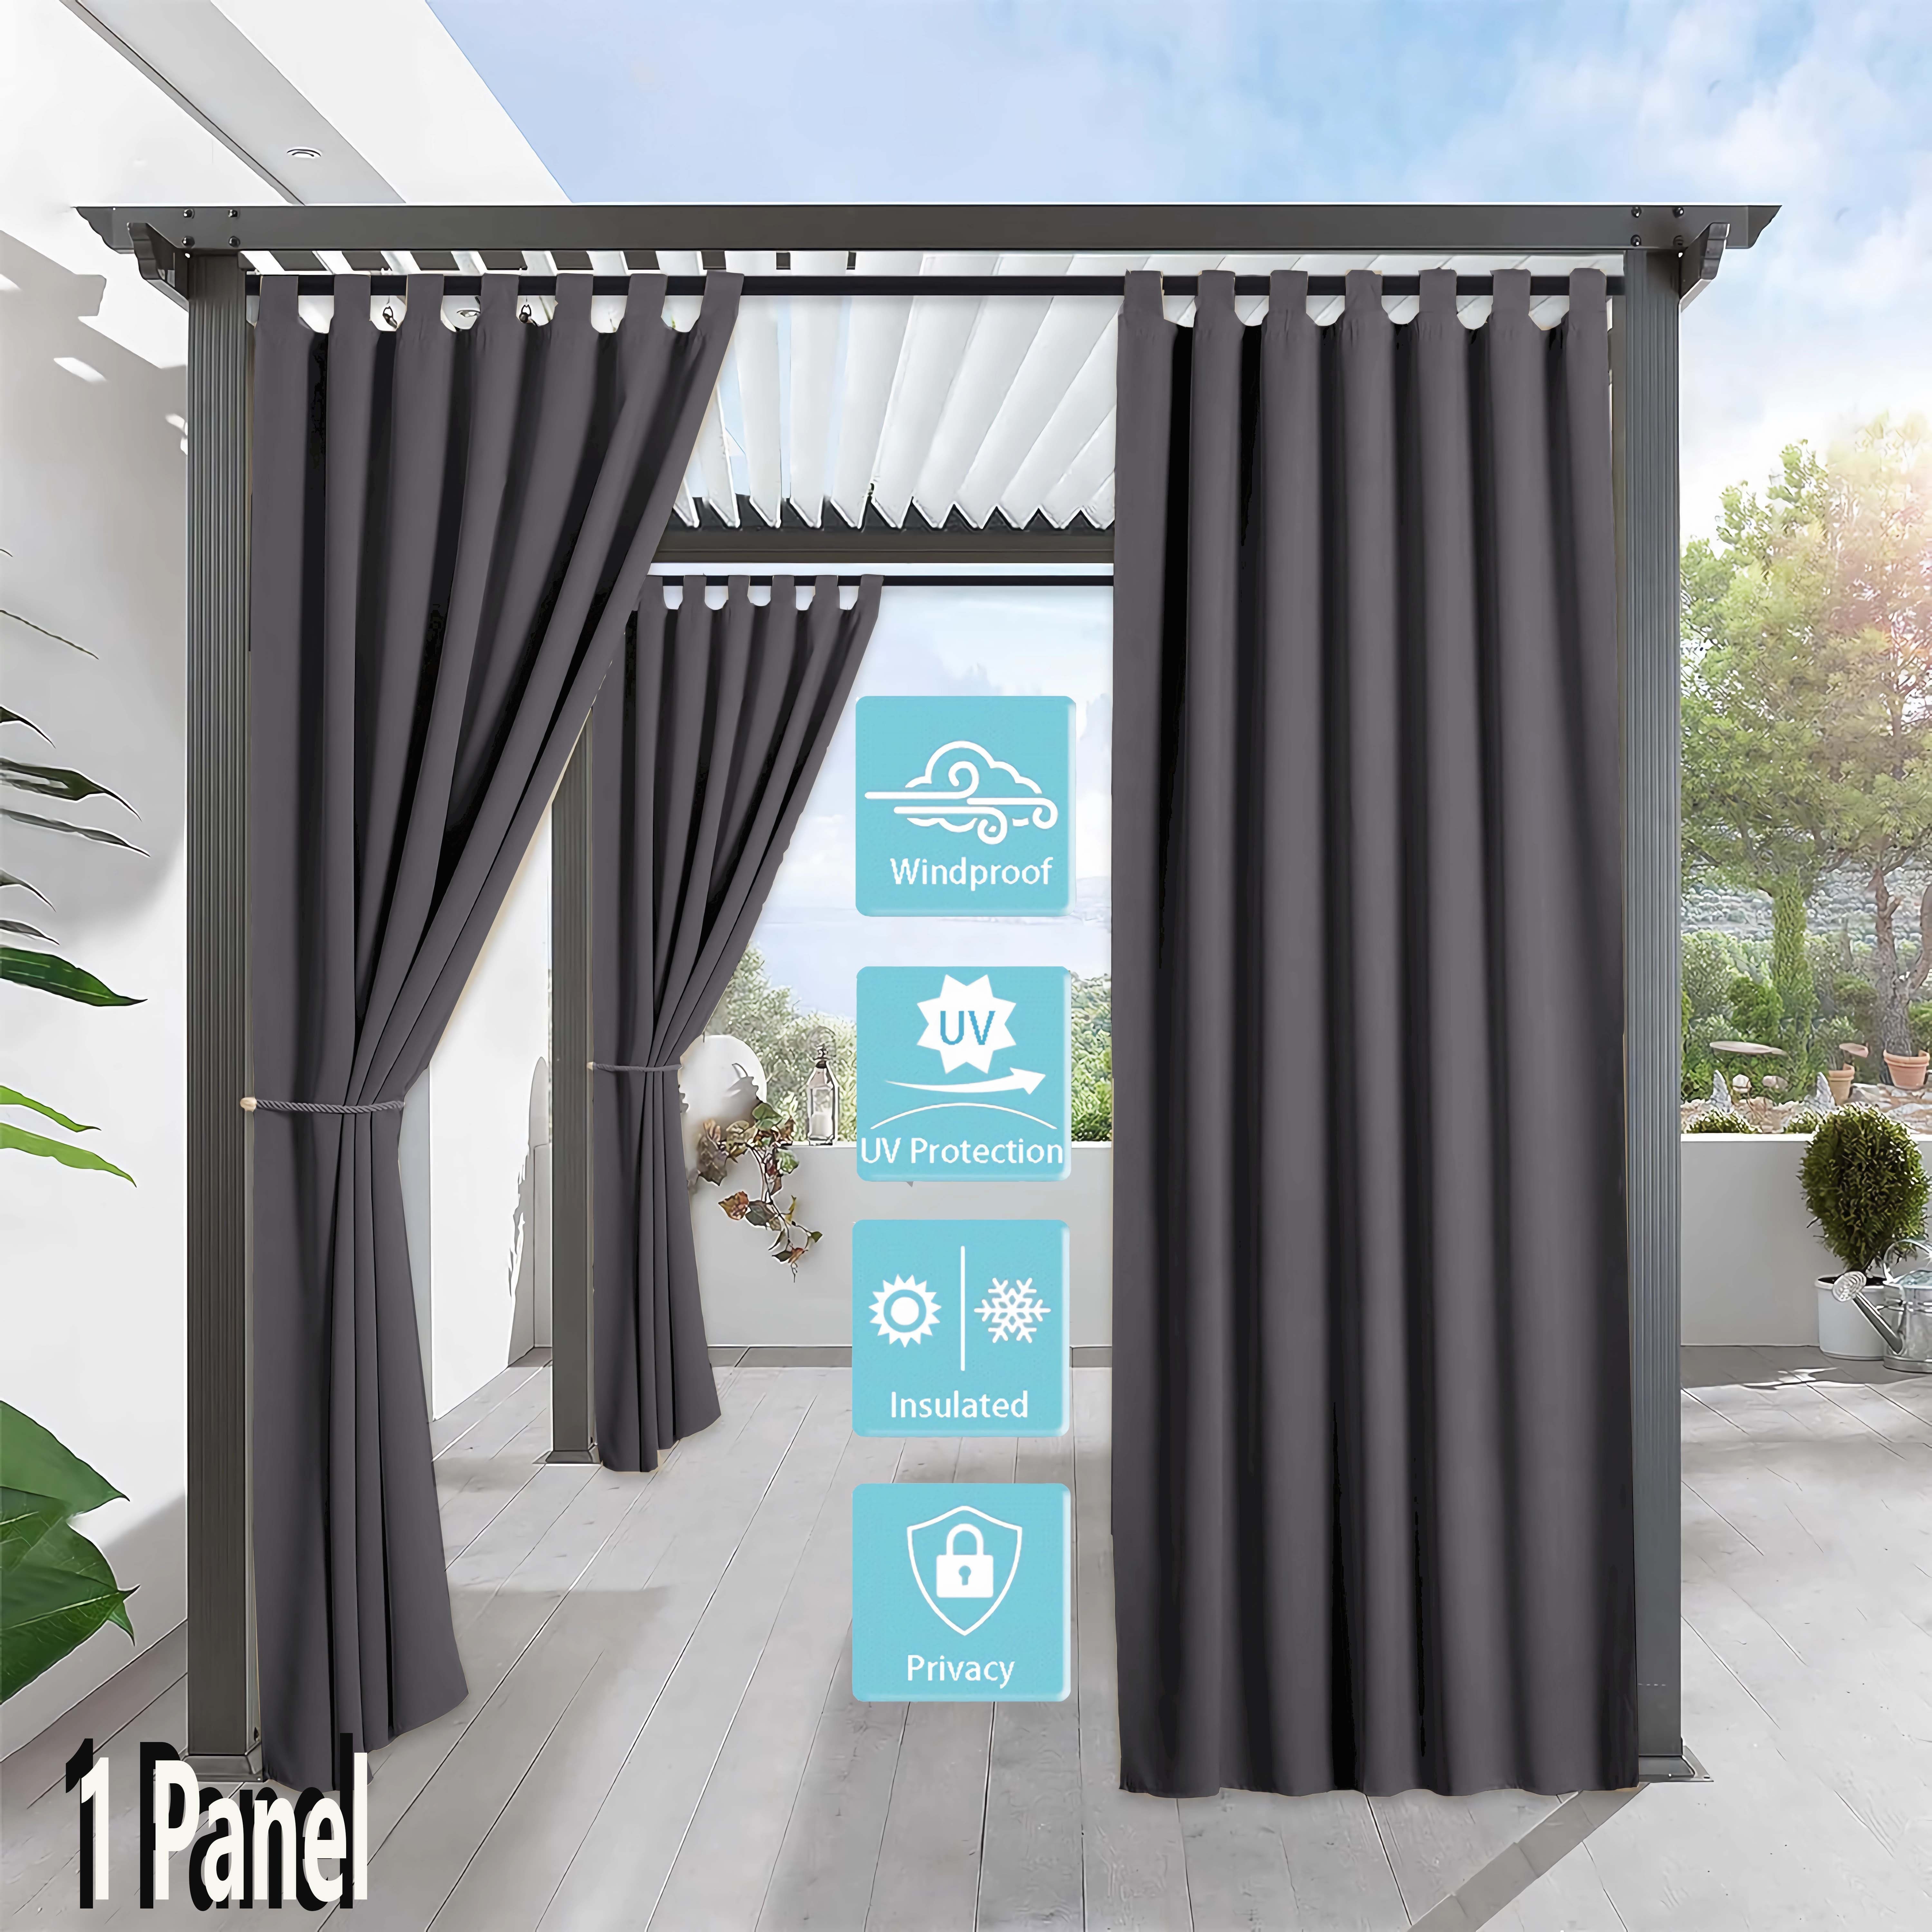 

Waterproof Outdoor Patio Curtain Panel - Classic Style, Blackout Privacy Shade For Porch, Cabana, Poolside - Durable Polyester, All-season